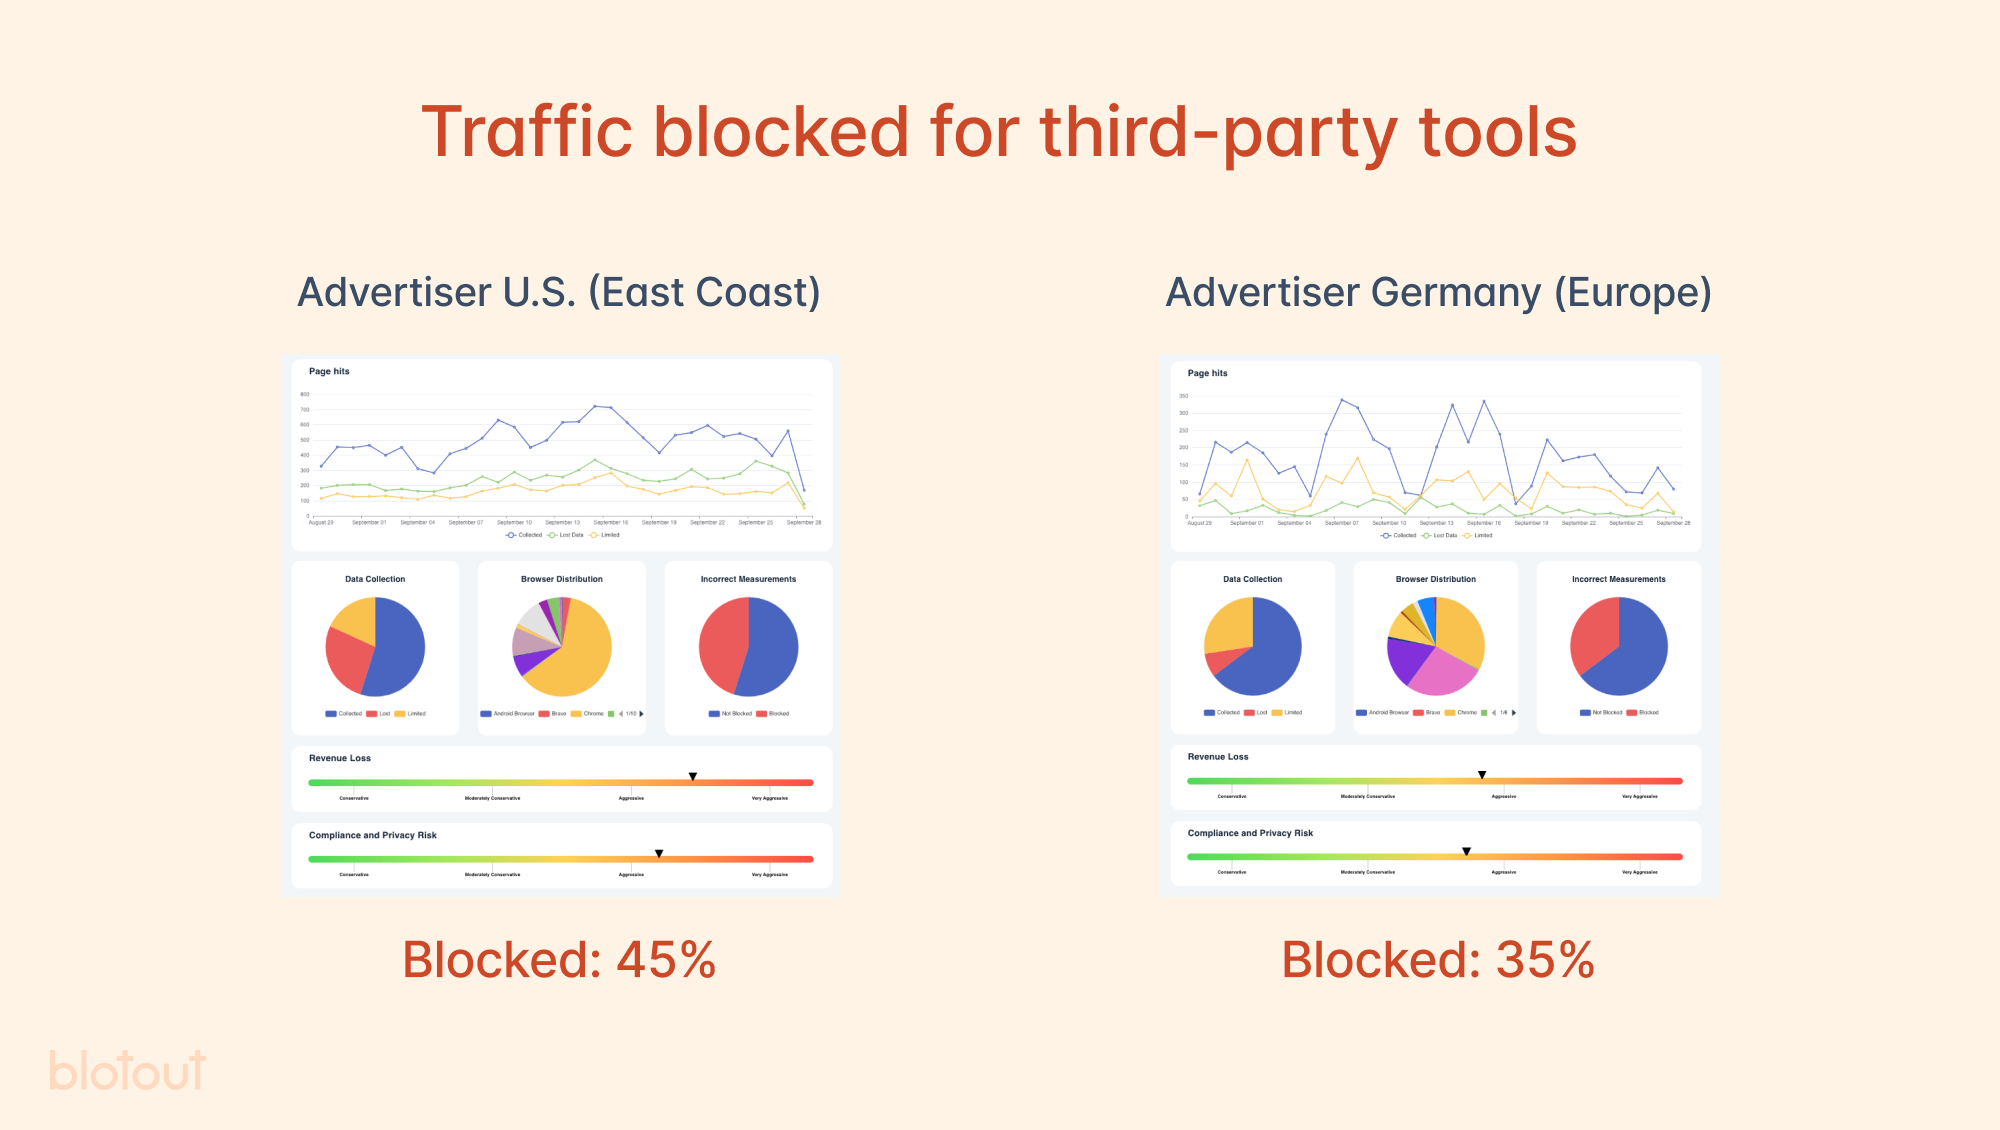 Traffic blocked for third-party tools